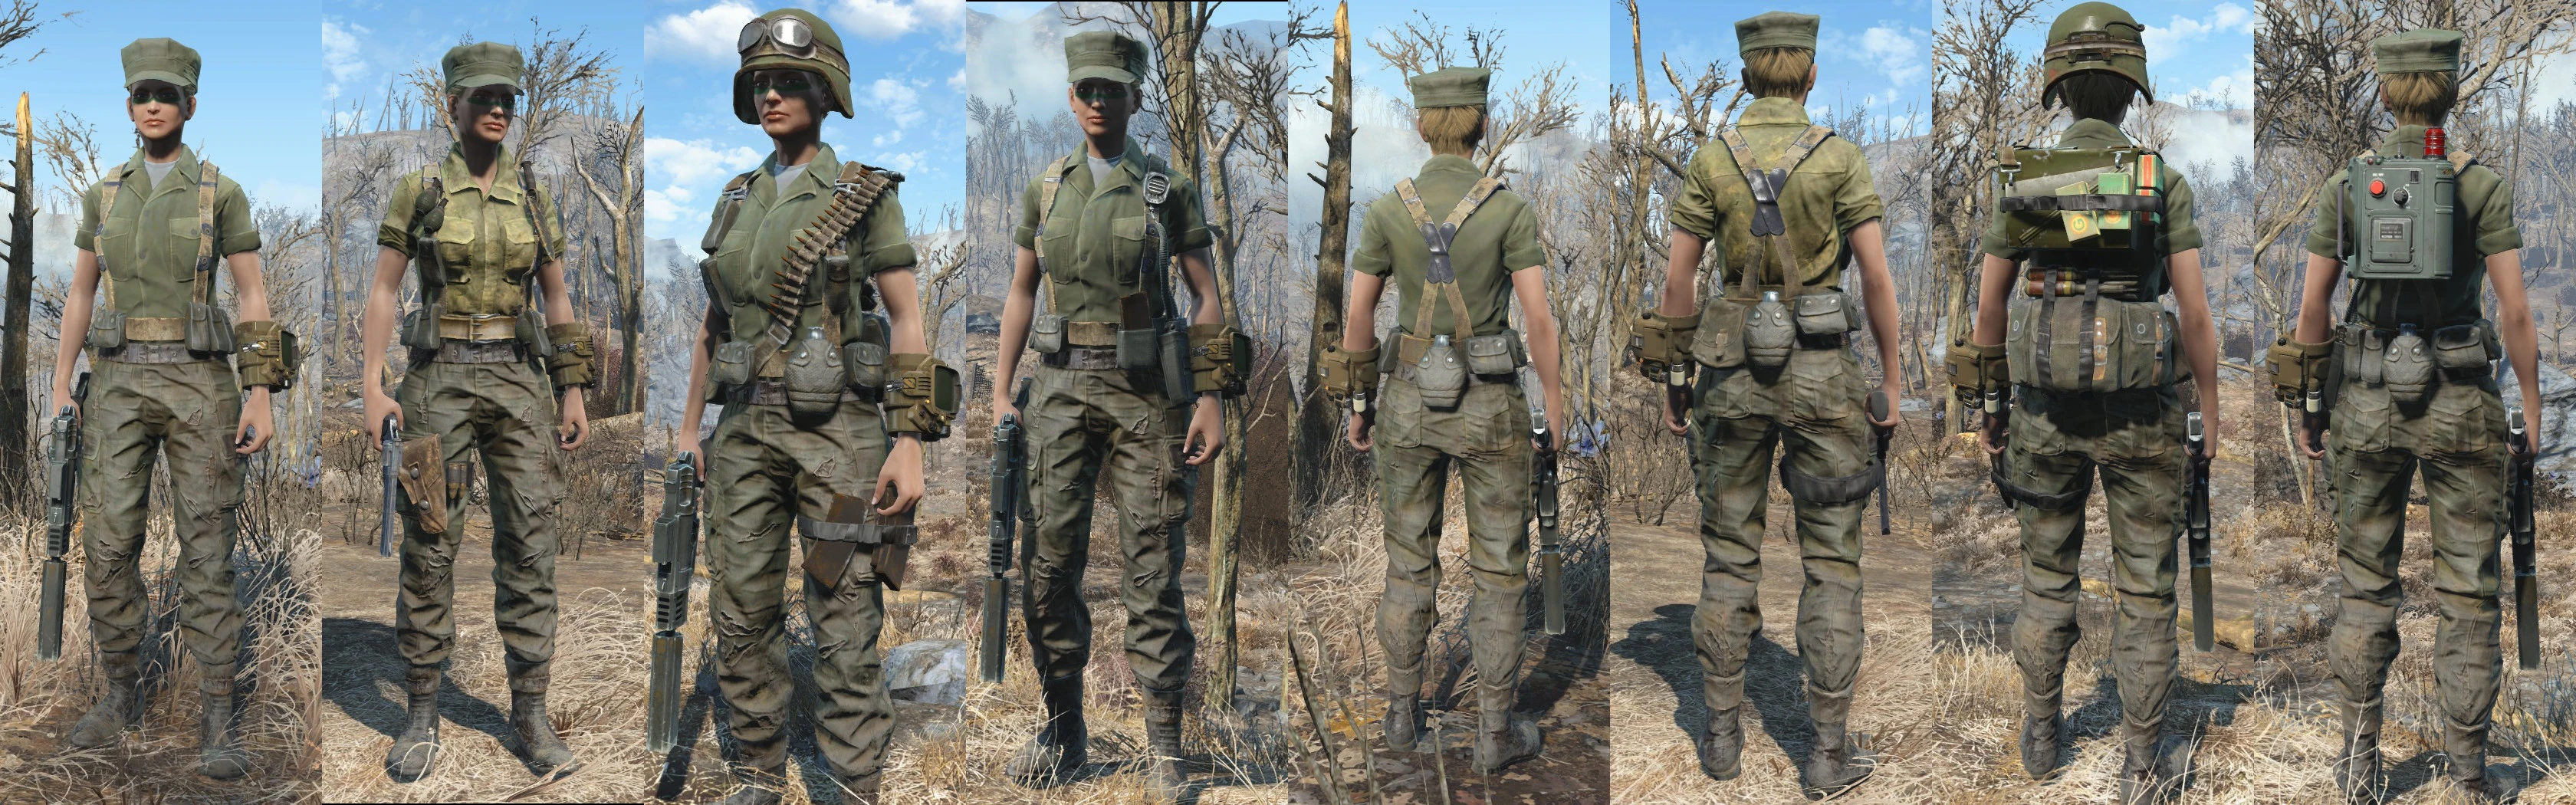 Fallout 4 outfits pack фото 13